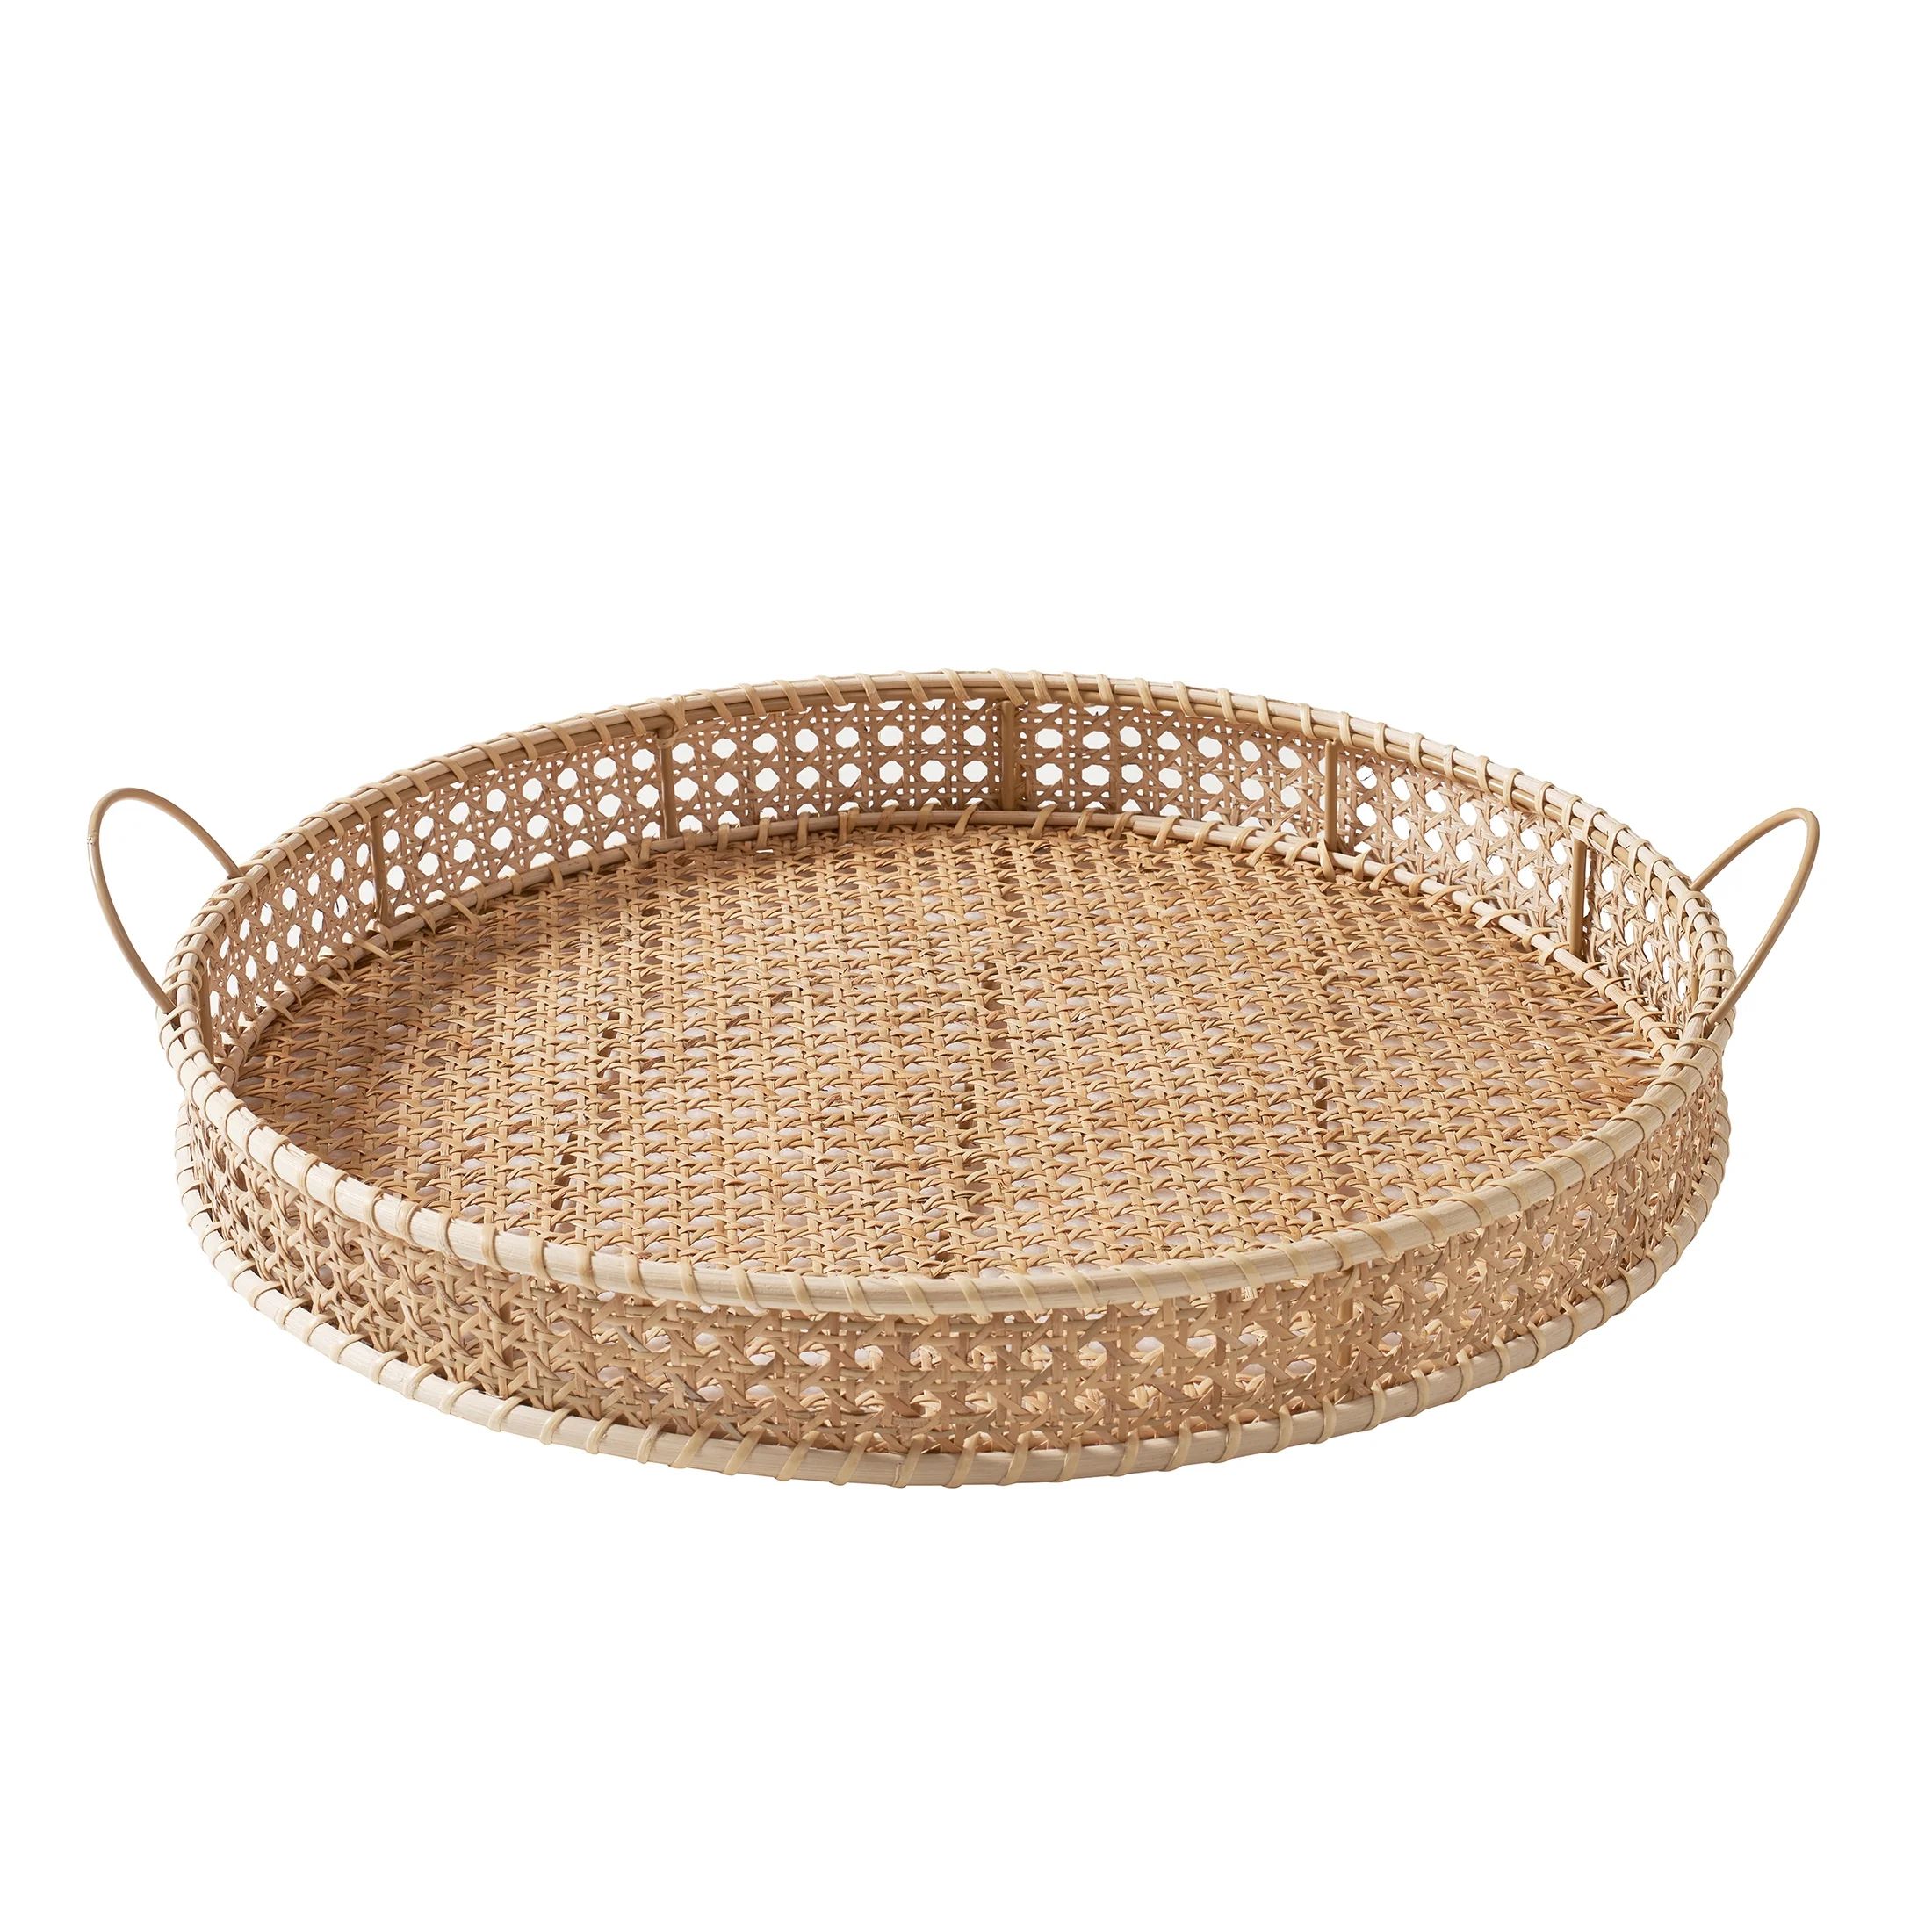 My Texas House 17" Natural Woven Rattan Decorative Tray with Metal Handles | Walmart (US)